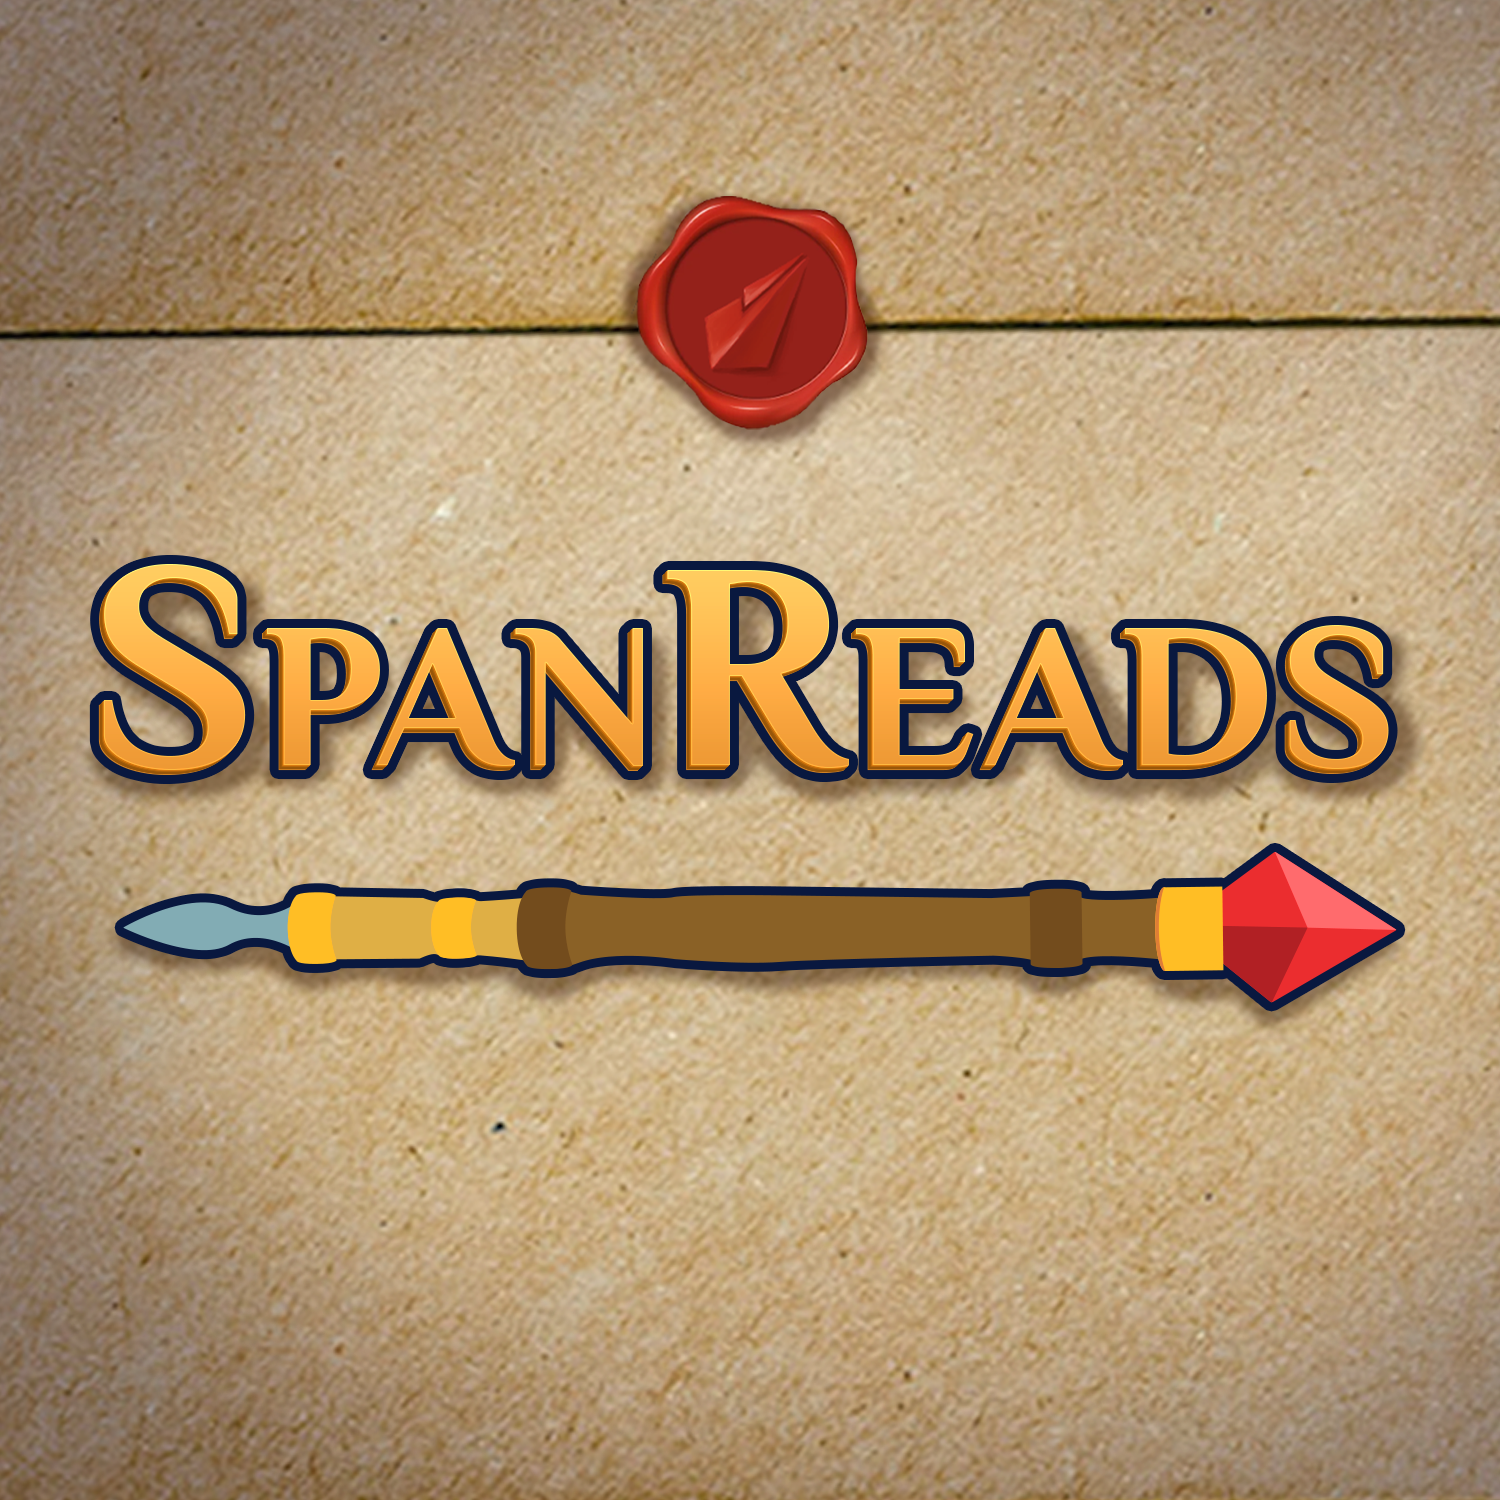 More information about "SpanReads: The Final Empire - Magic"